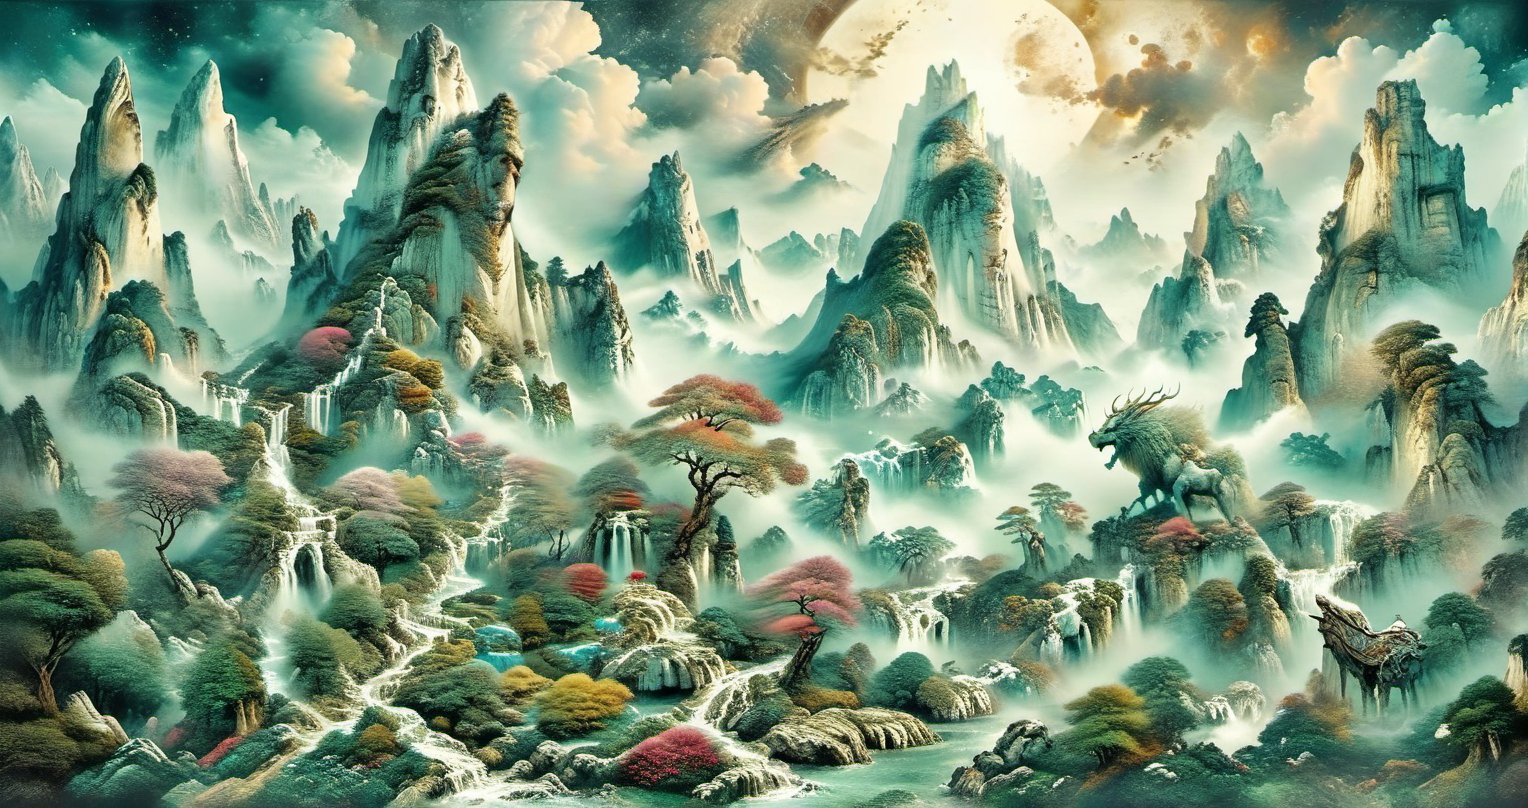 (ultra detailed, ultra highres), (masterpiece, top quality, best quality, official art :1.4), (high quality:1.3), cinematic ink wash painting depicting a paradise in a Xianxia world. The scene features a mist-covered mountaintop blooming with a myriad of flowers, steep cliffs, and cascading waterfalls. A gigantic mythical beast can be seen swirling in the air among the mountains and clouds. The artwork conveys an ethereal, otherworldly beauty, capturing the essence of a hidden, magical realm.,more detail XL,nodf_xl